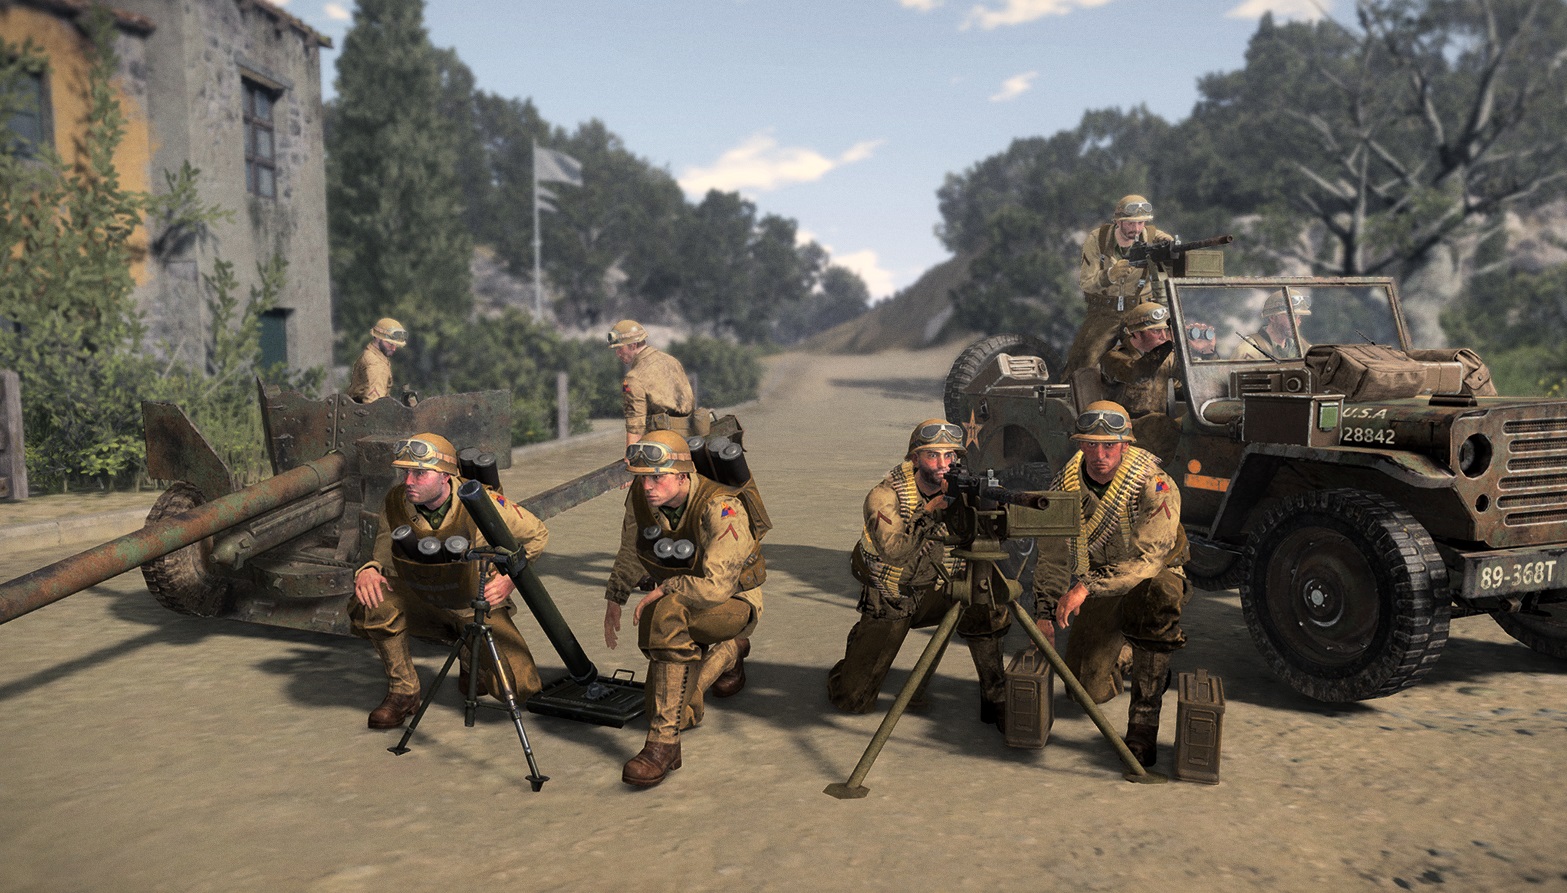  Company of Heroes 3 update introduces more than '1,300 bug fixes, changes and improvements' along with free and premium cosmetics 